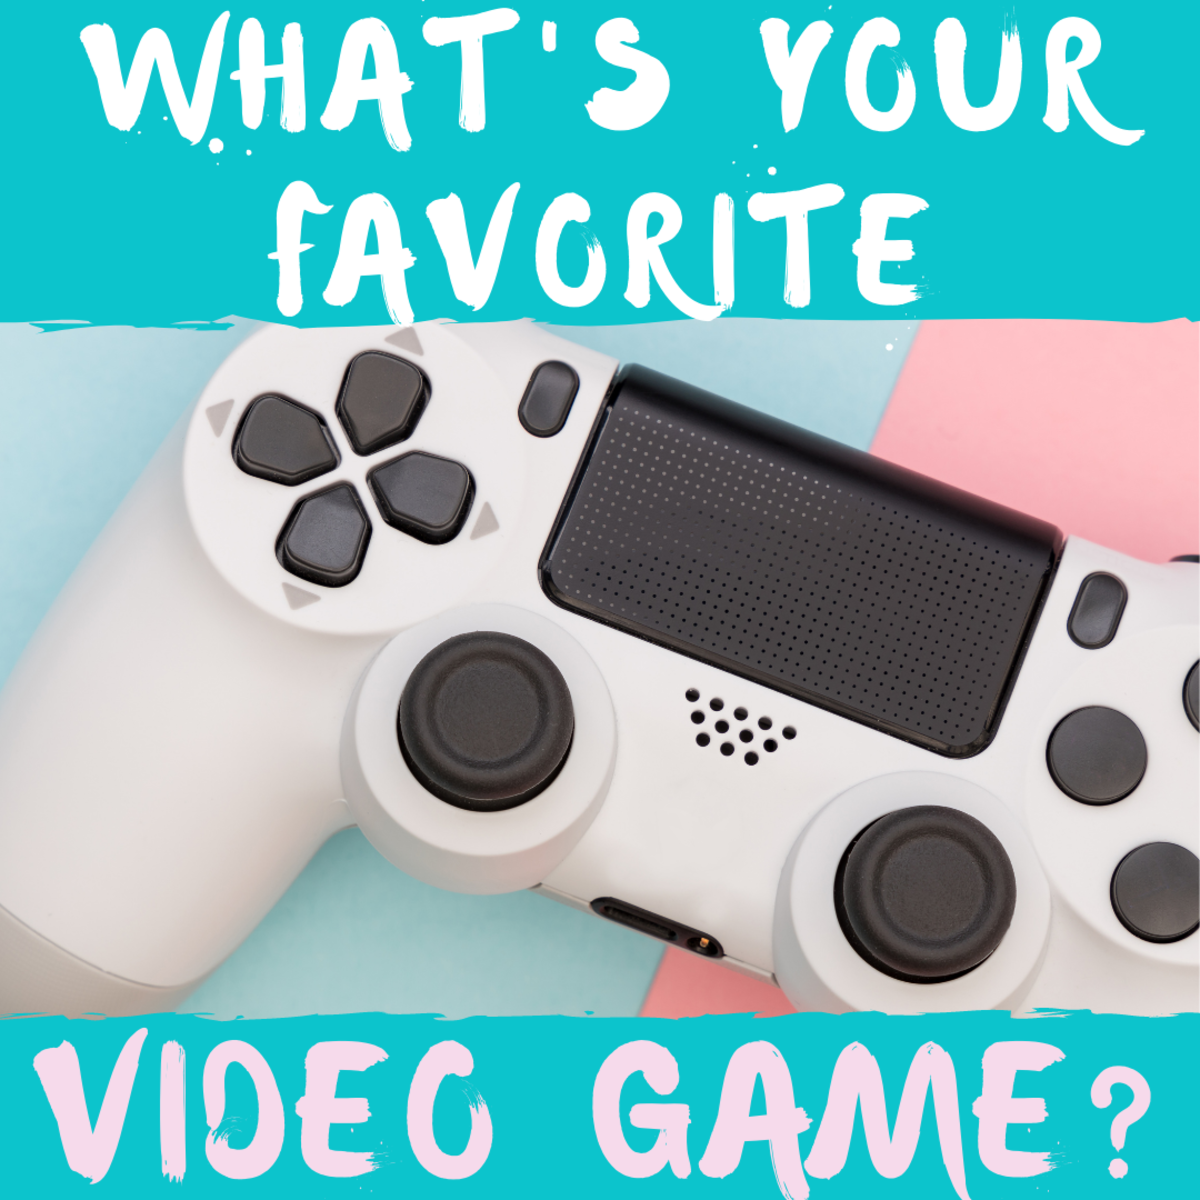 Do you like old school games or newer ones?